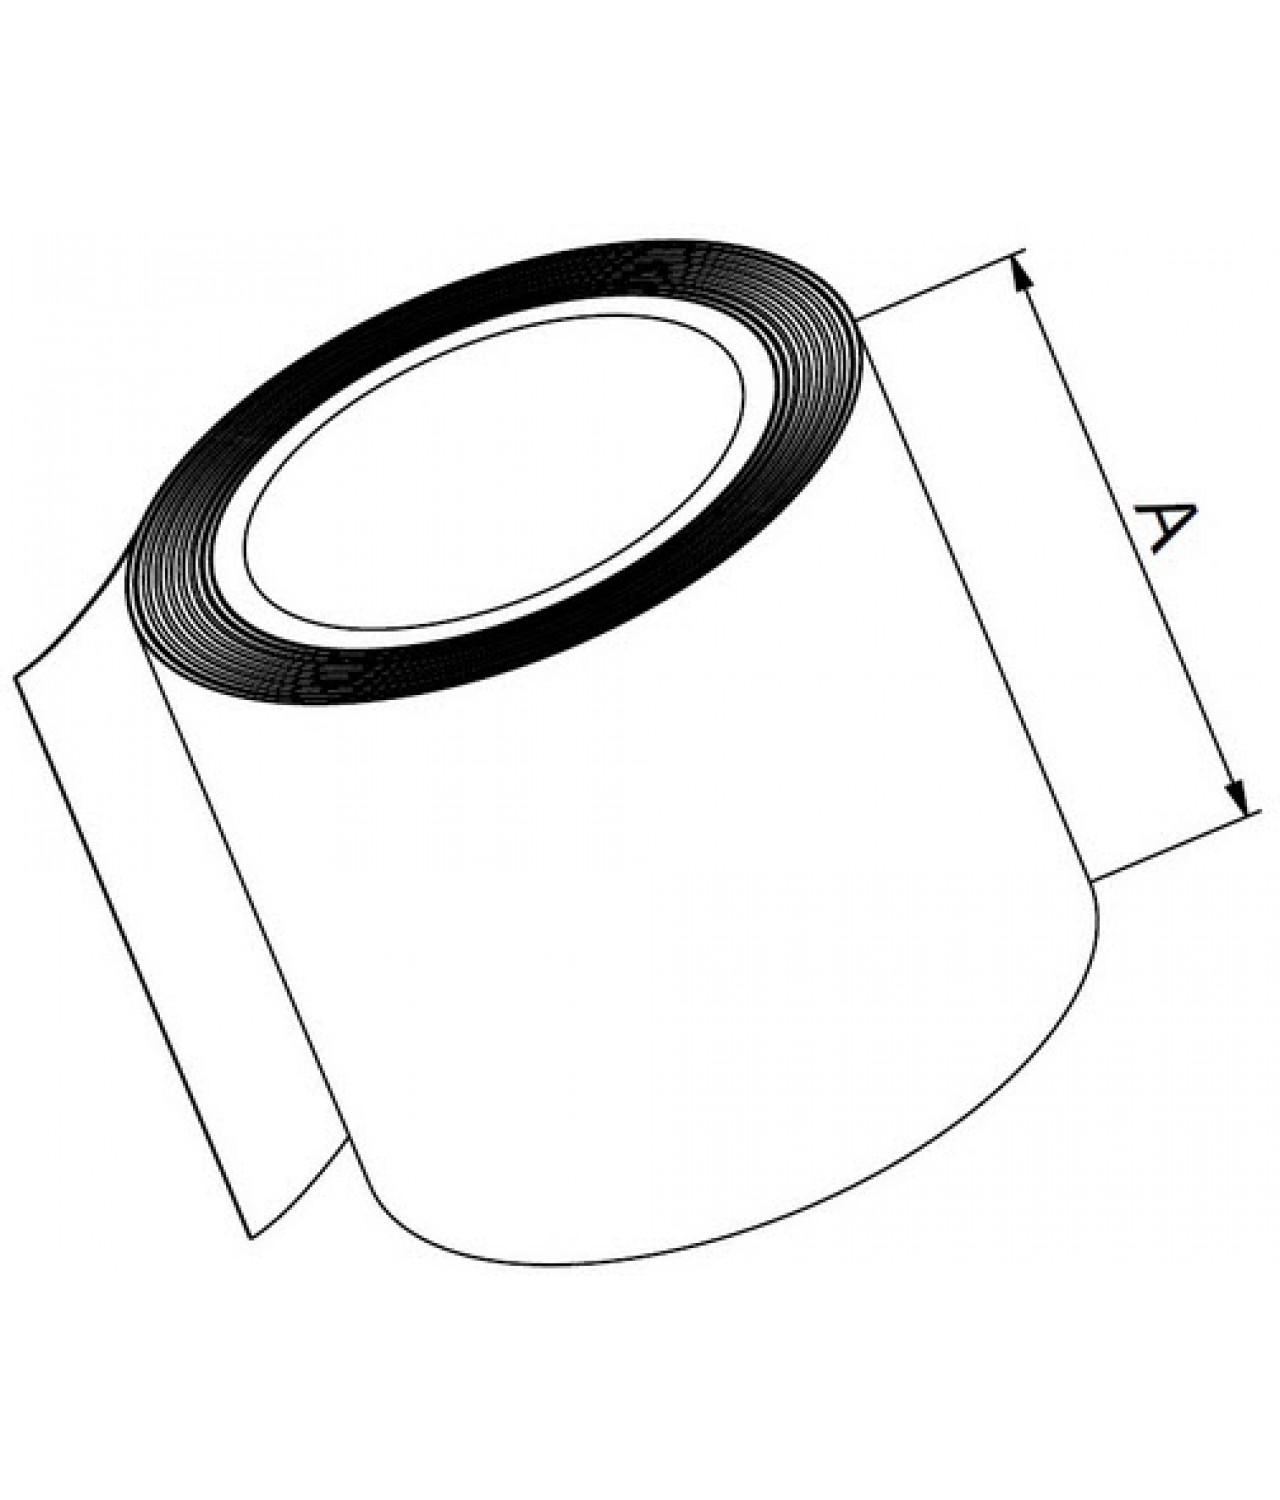 Adhesive PVC tape for plastic ducts sealing, 5.0 cm x 5 m, TAP - drawing